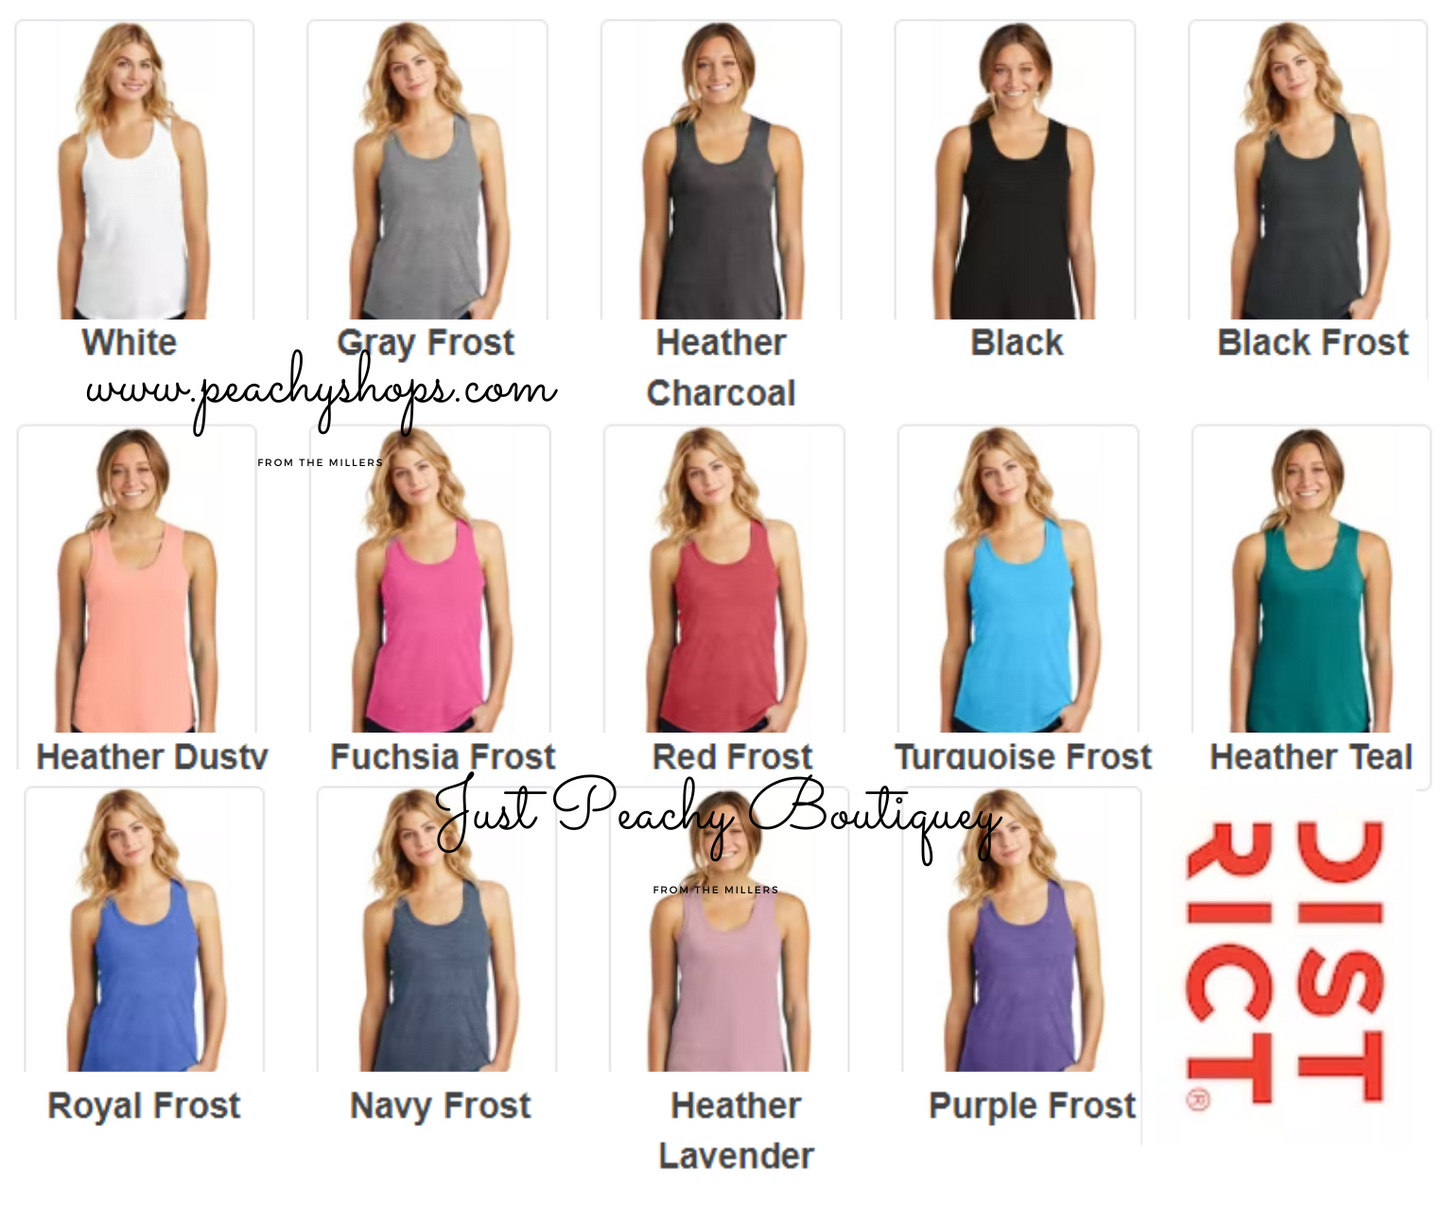 FOURTH GRADE T-SHIRT TANK TOP OR SWEATER